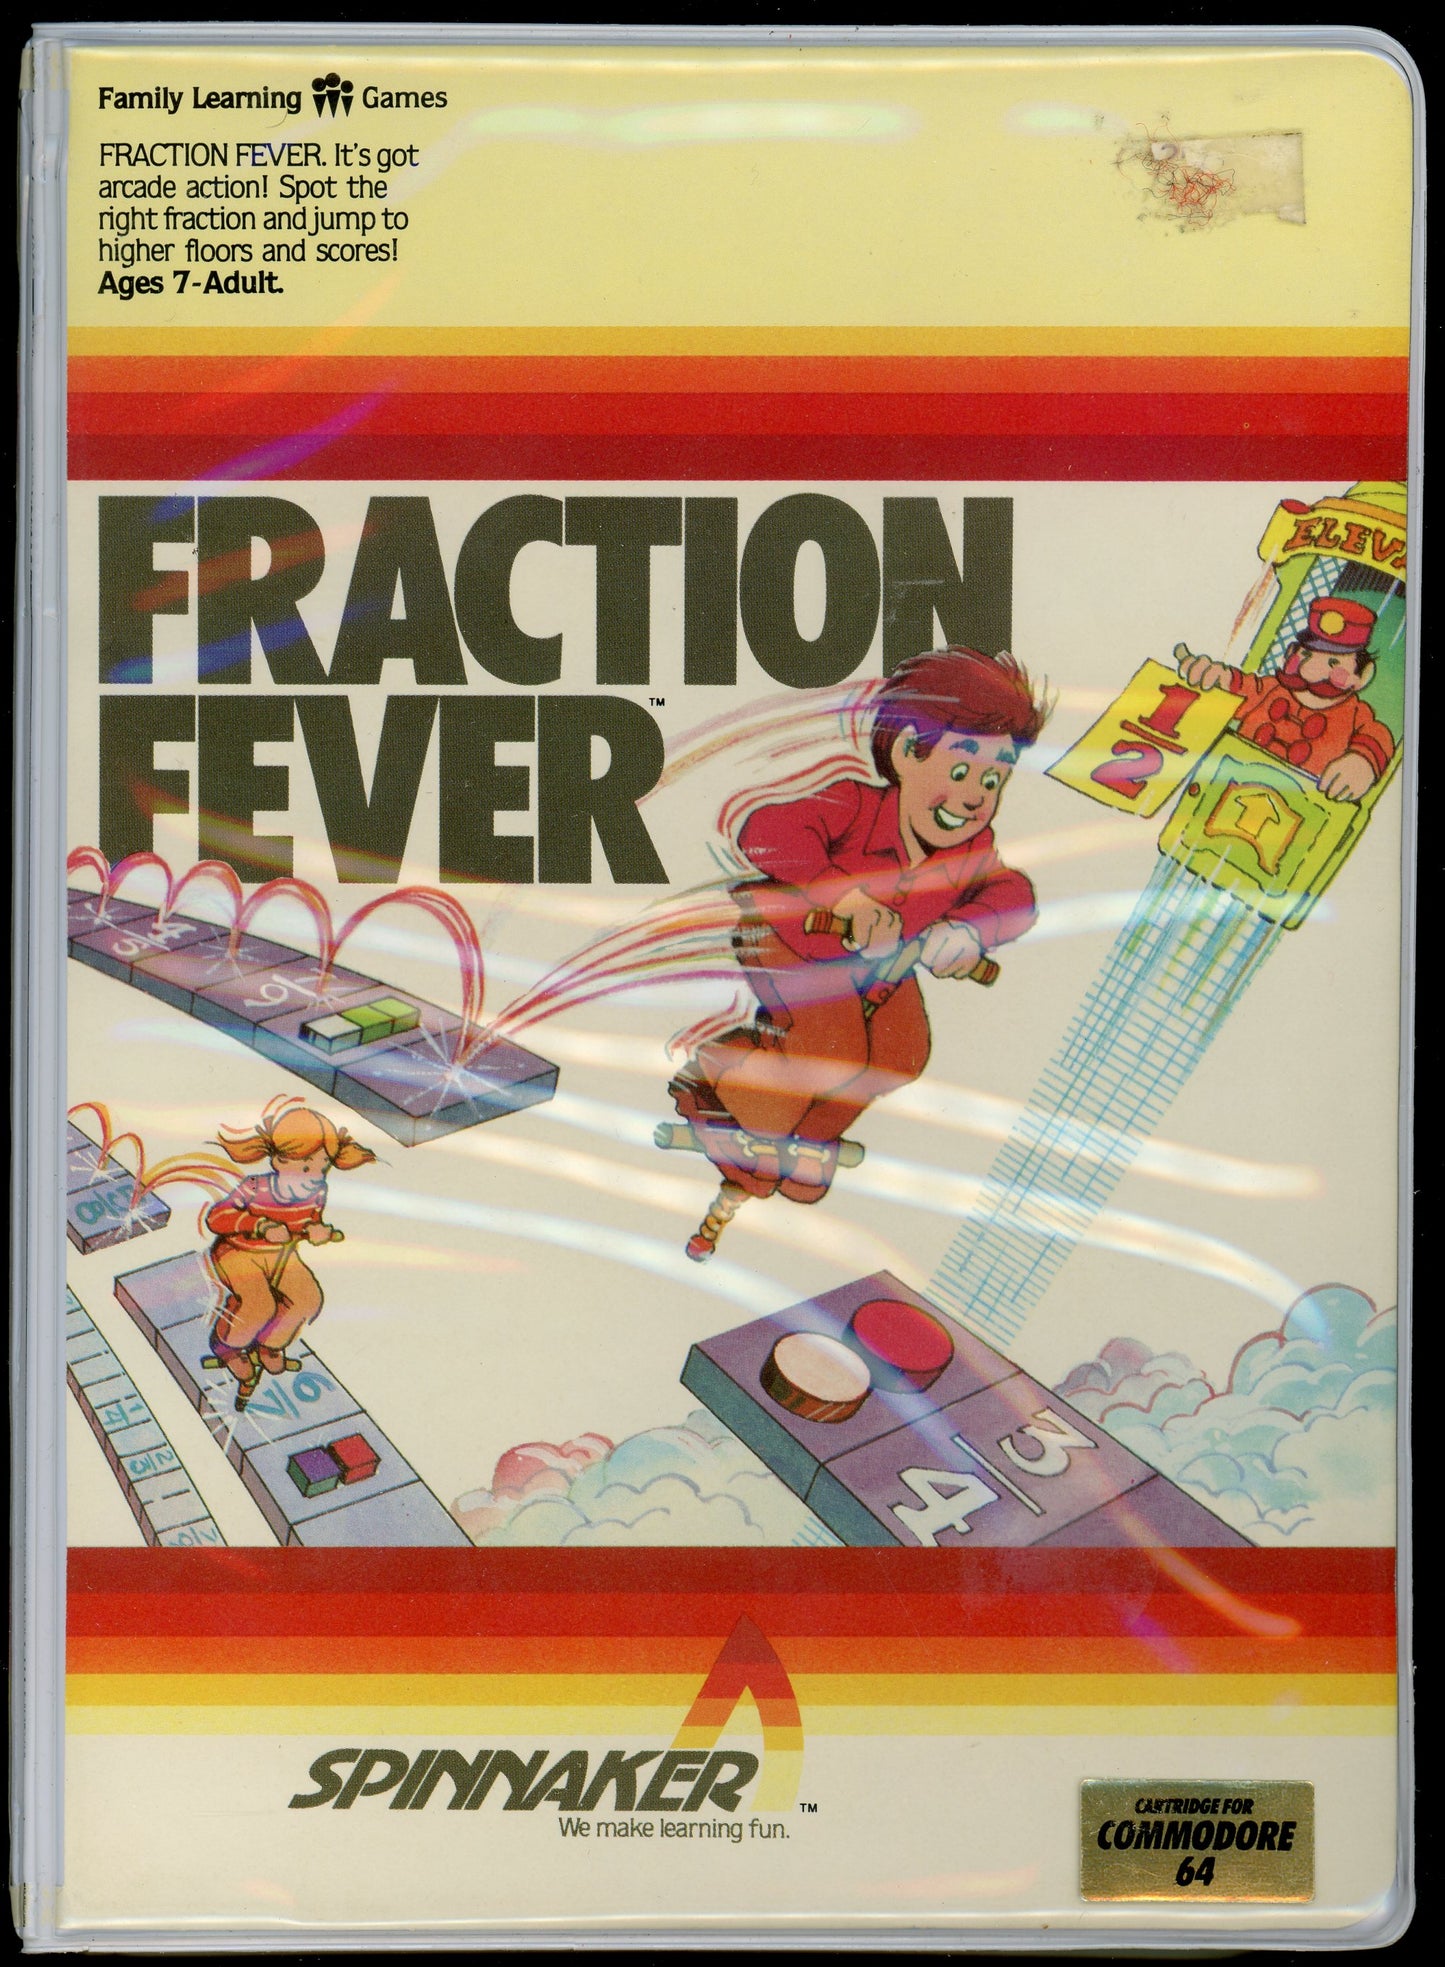 Spinnaker Fraction Fever Commodore 64 Video Game Cartridge Plus Box, Manual